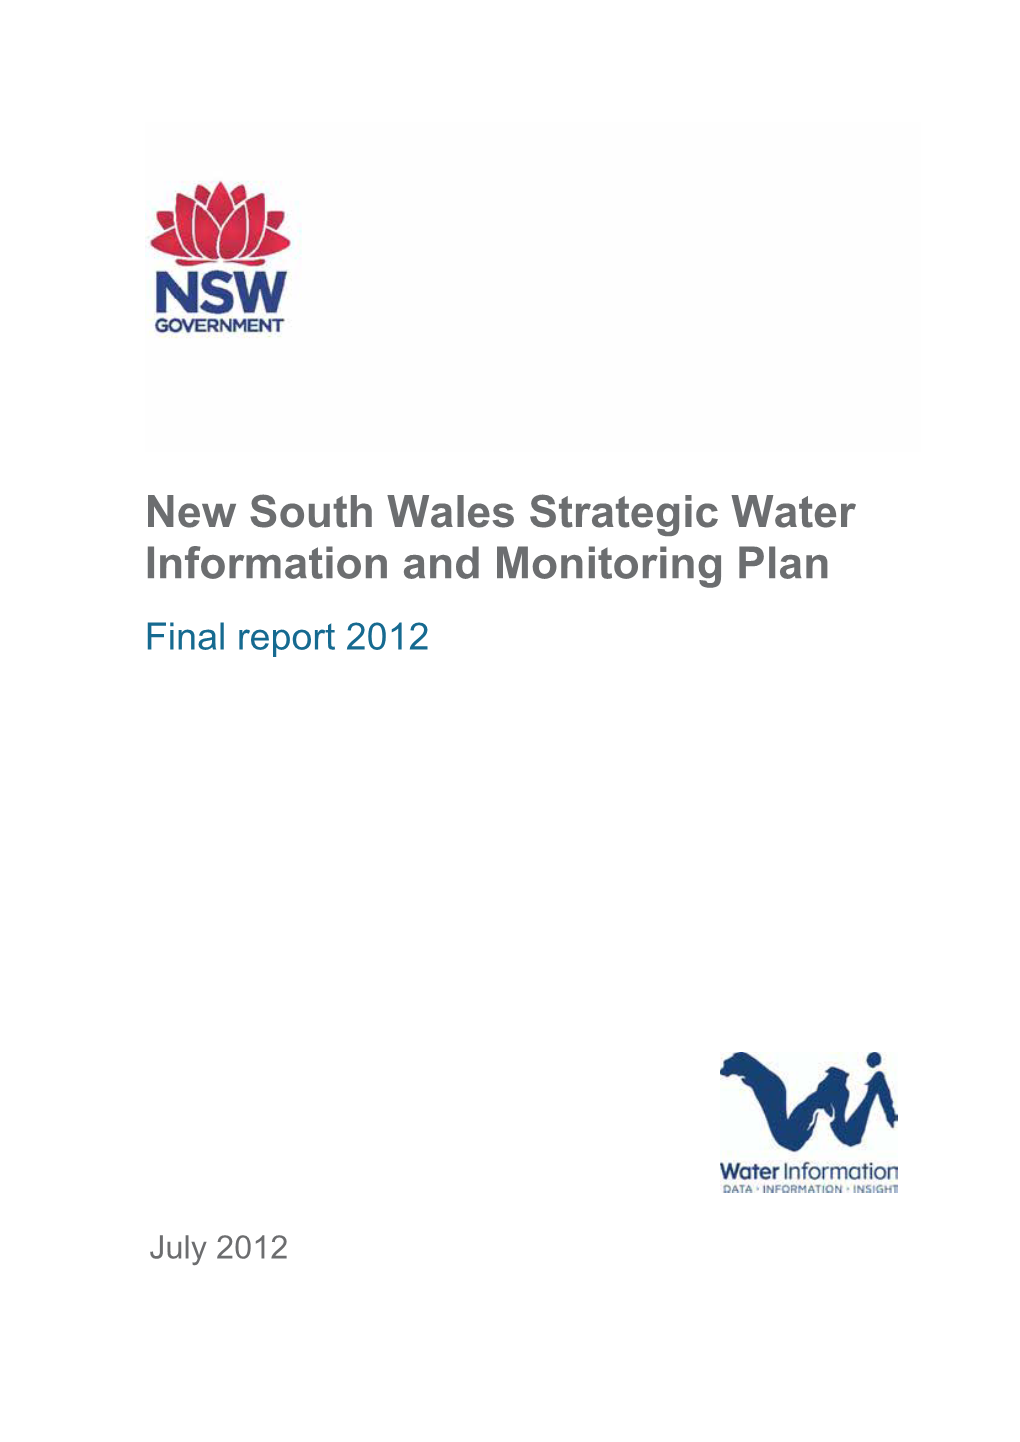 Strategic Water Information and Monitoring Plan, New South Wales